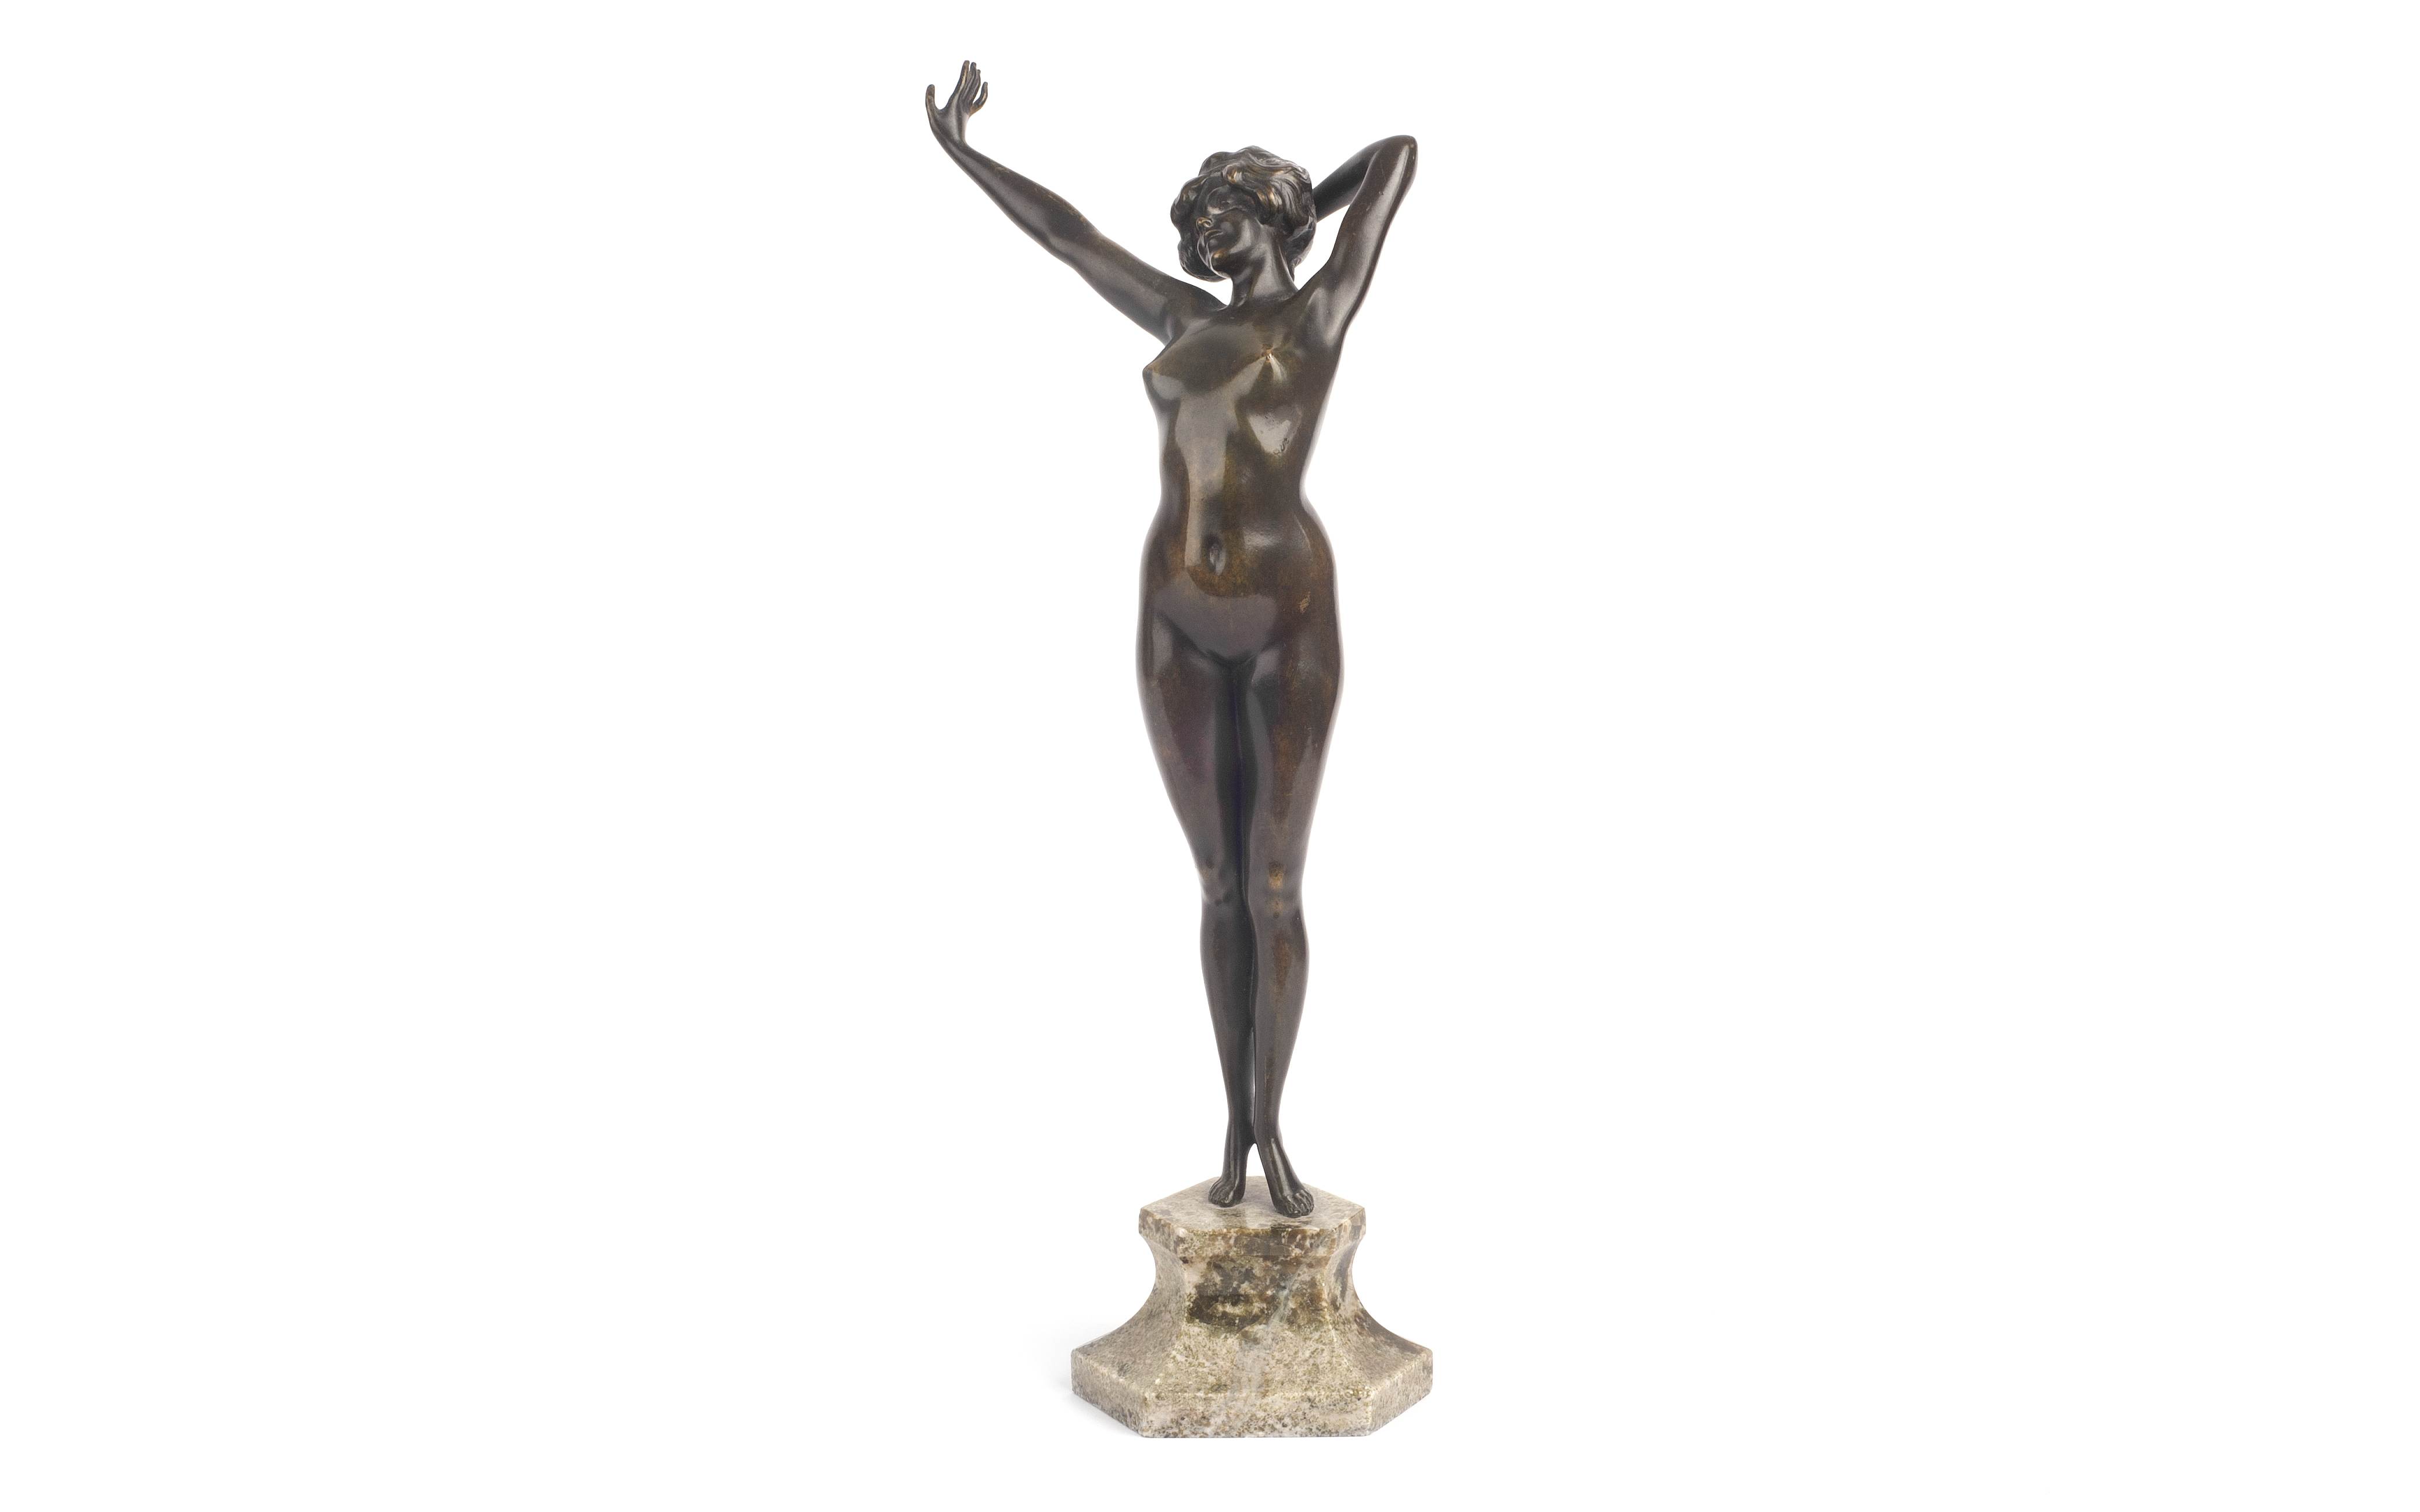 ATTRIBUTED TO PAUL PHILIPPE: AN ART DECO PERIOD BRONZE FIGURE OF 'THE AWAKENING' - Image 2 of 4